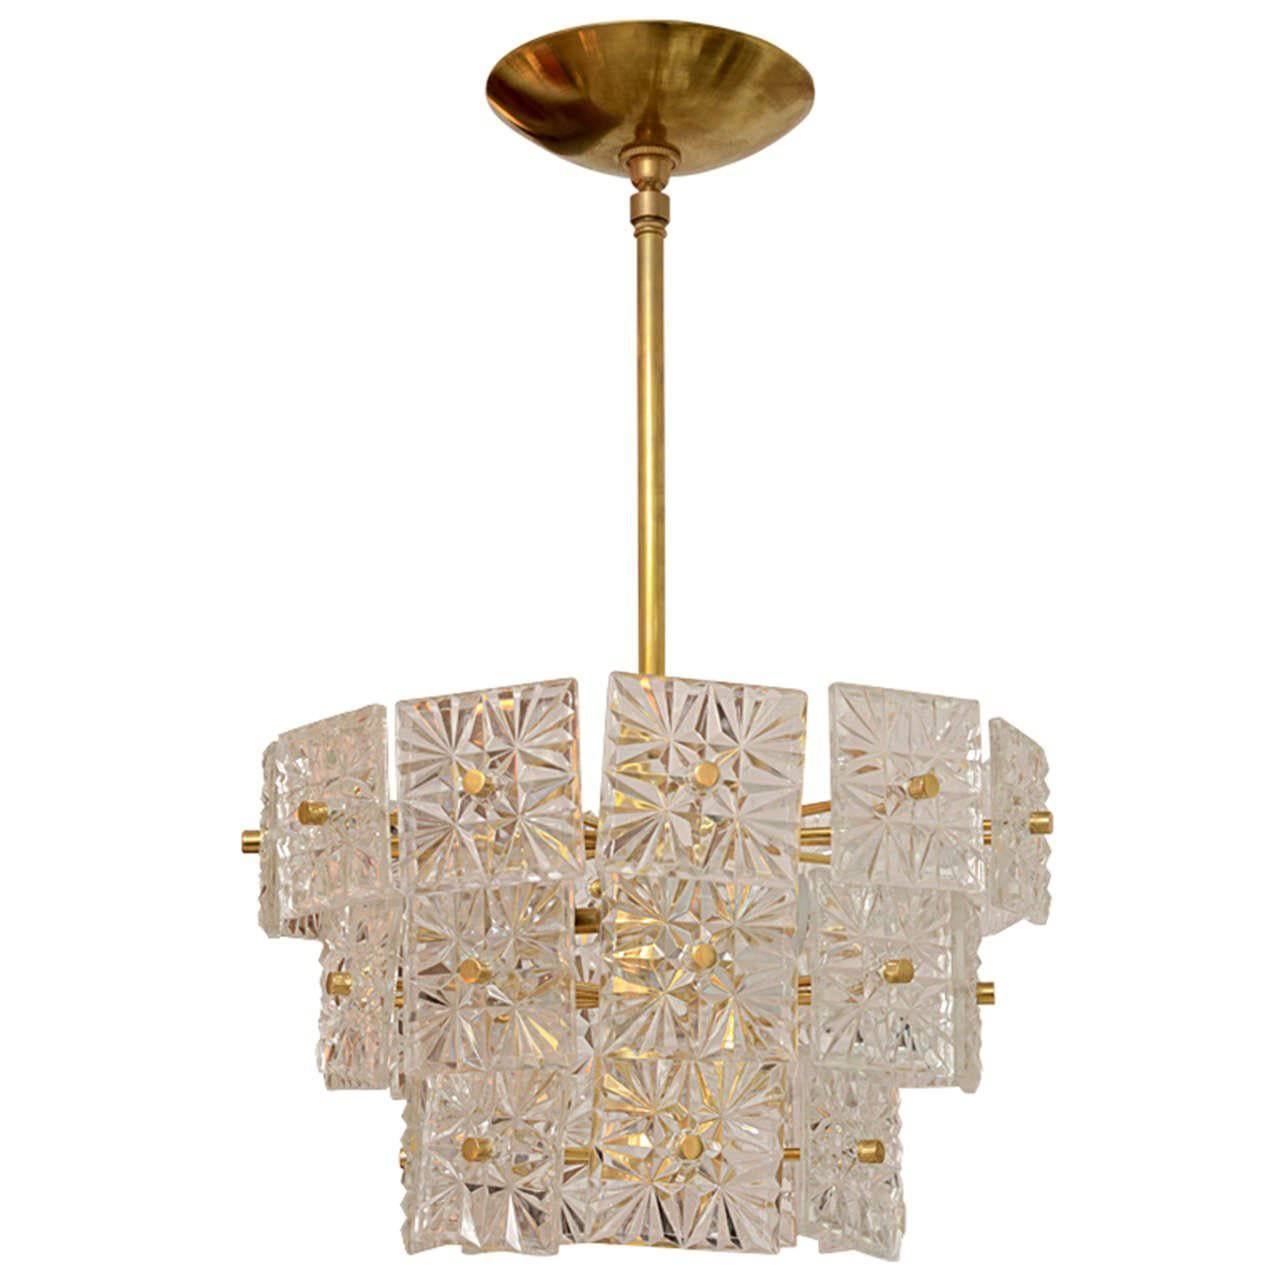 Brass Three Tier Chandelier Featuring Etched Square Glass Tiles by Kalmar